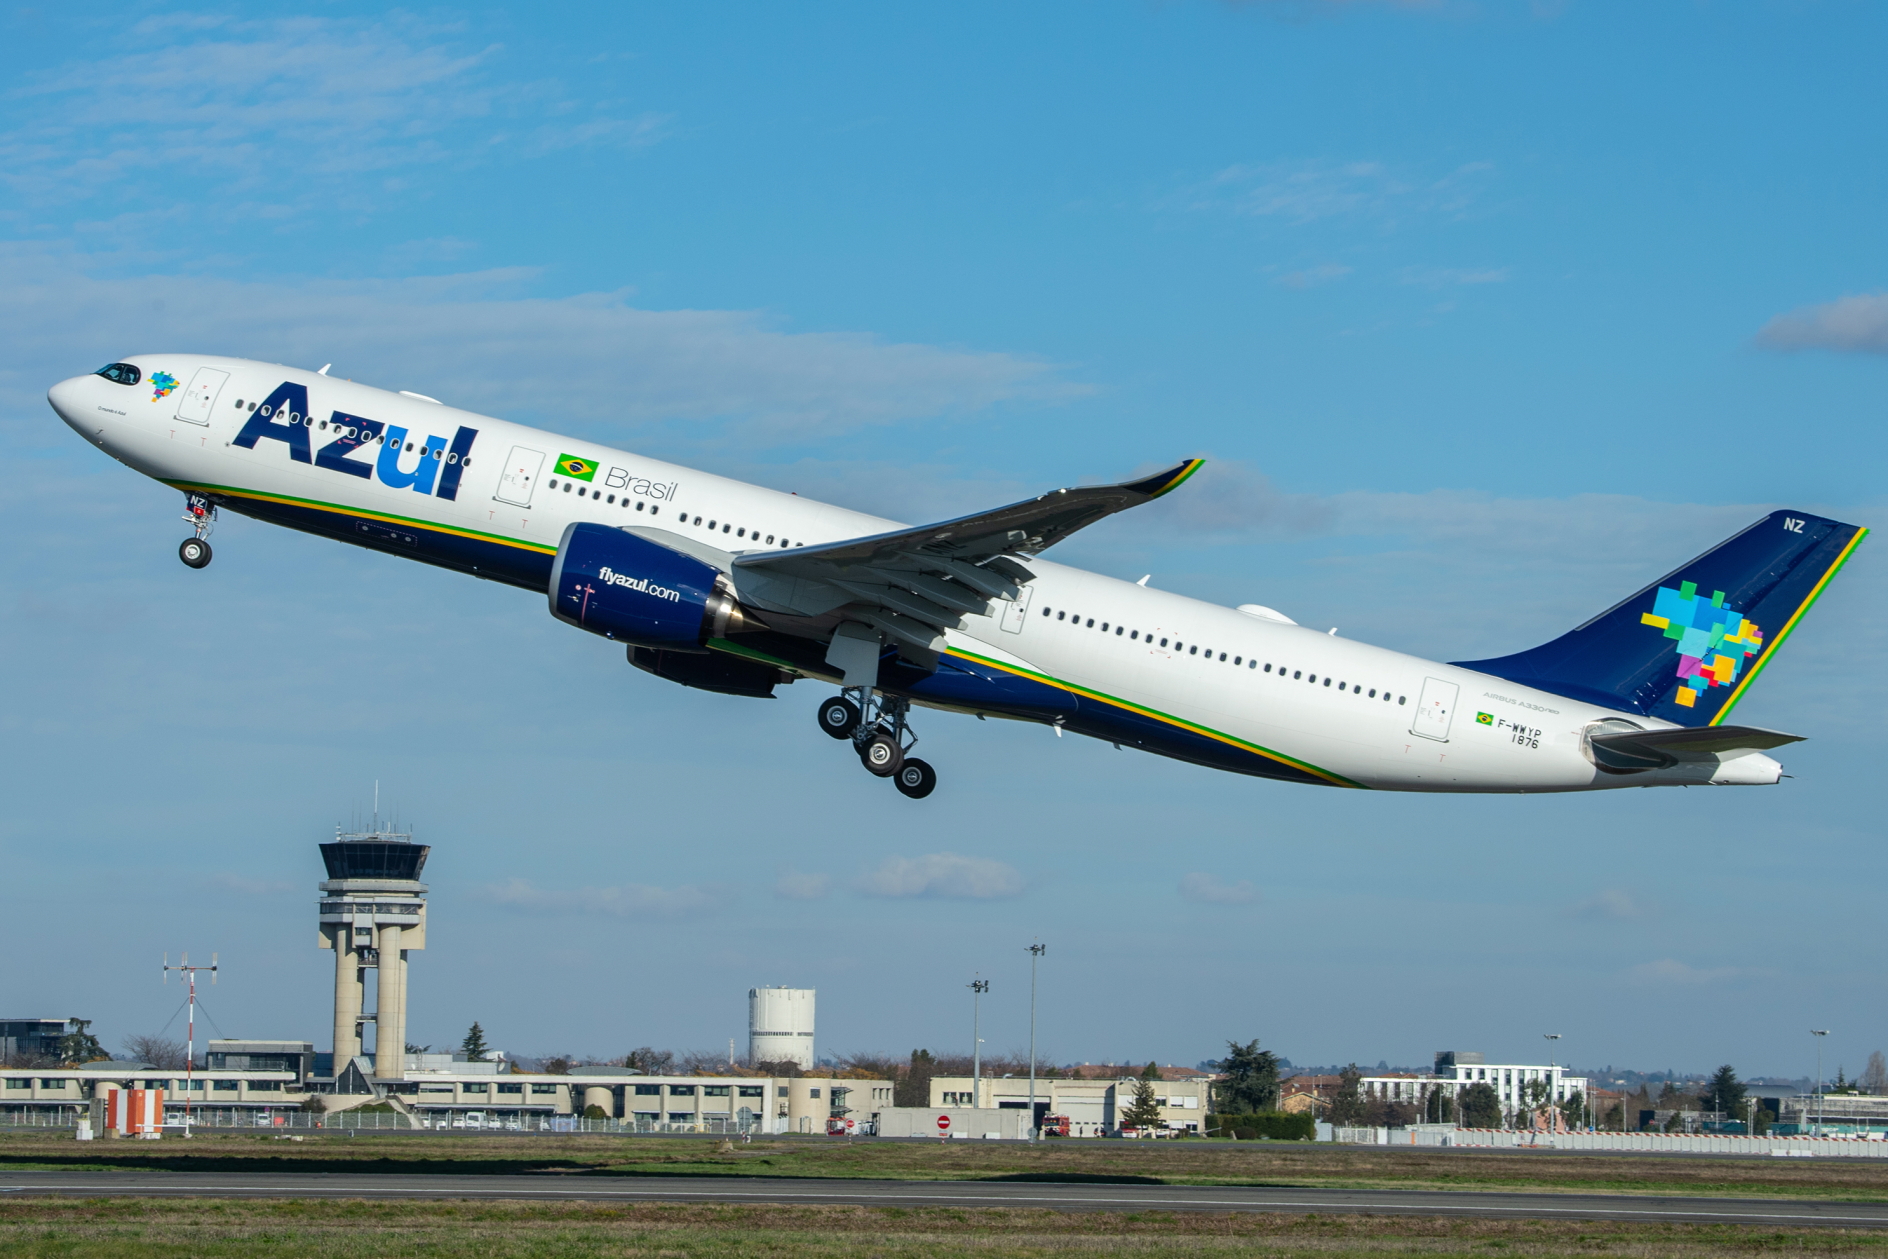 Azul A330-900. The airlinewas the first in the Americas to fly the A330neo. Click to enlarge.